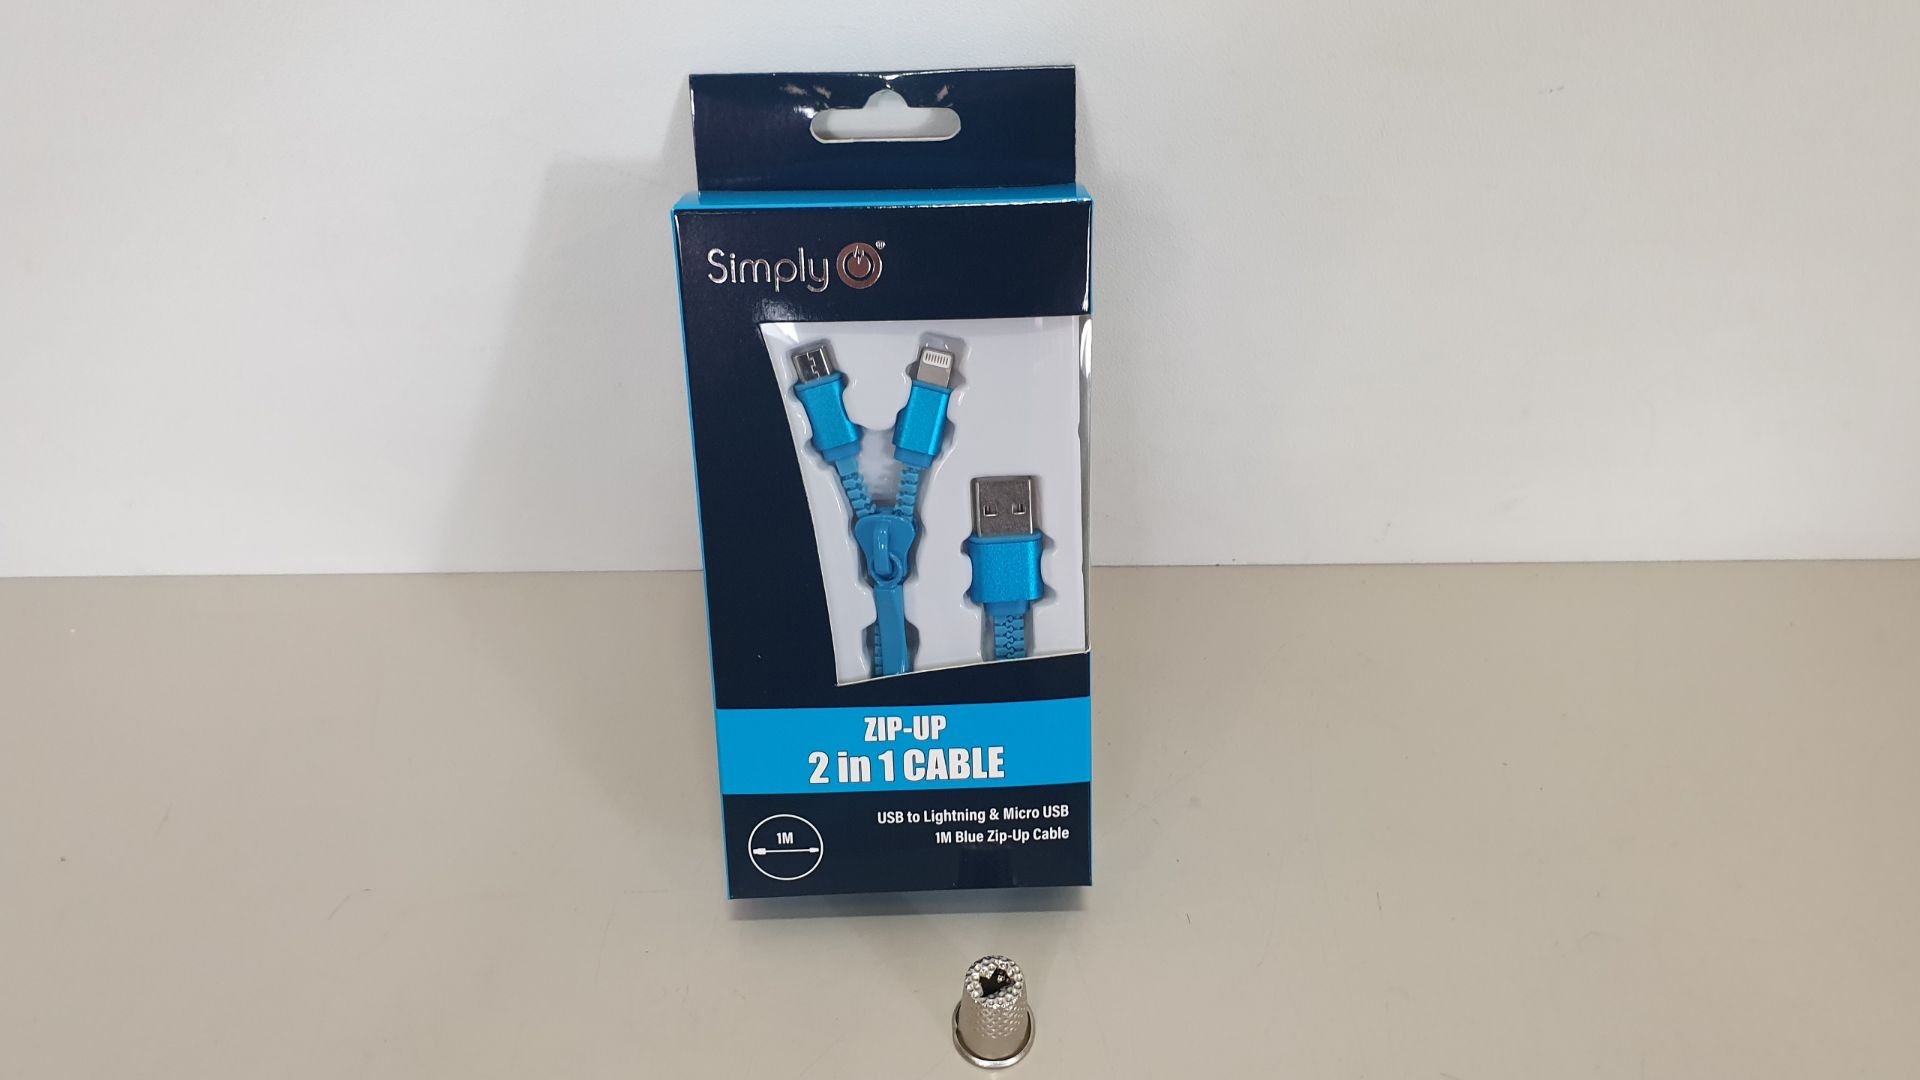 200 X BRAND NEW SIMPLY ZIP-UP 2 IN 1 CABLE - USB TO LIGHTNING & MICRO USB 1M BLUE ZIP UP CABLE IN